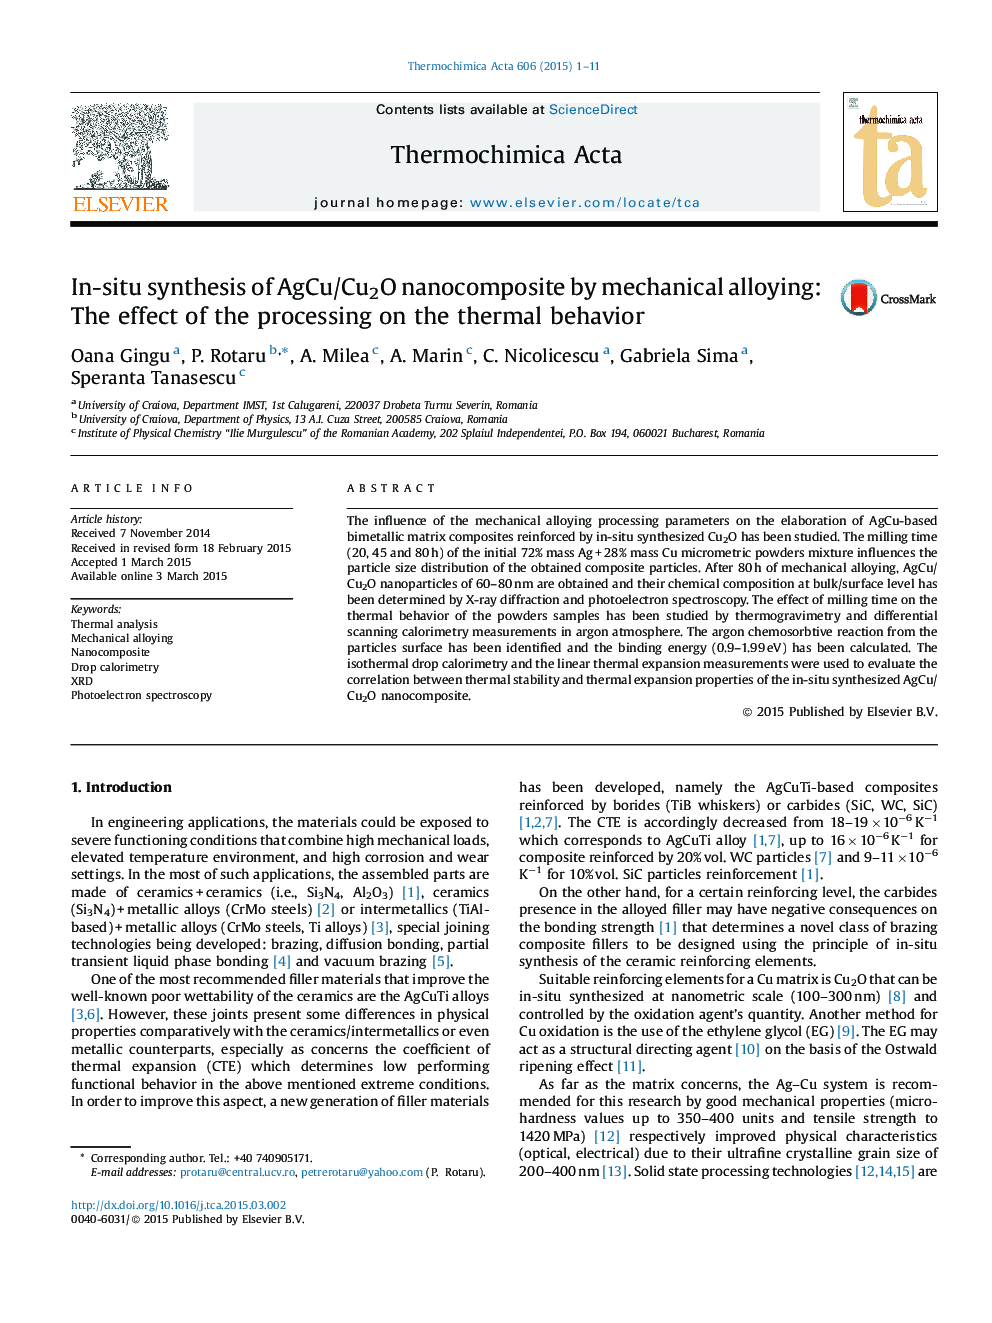 In-situ synthesis of AgCu/Cu2O nanocomposite by mechanical alloying: The effect of the processing on the thermal behavior